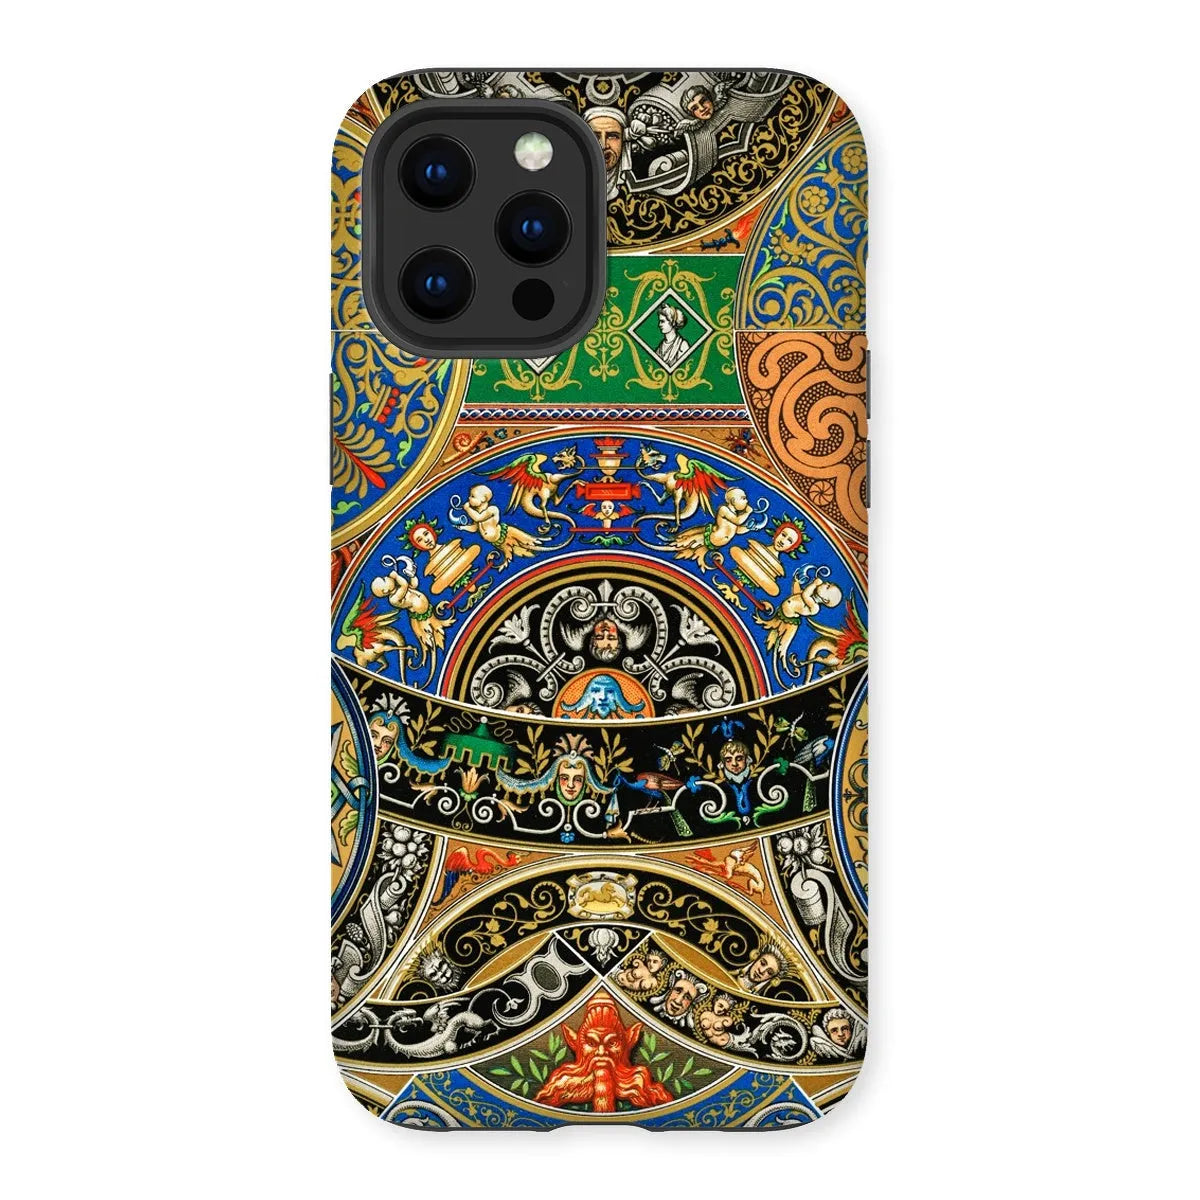 Renaissance Pattern 2 By Auguste Racinet Tough Phone Case - Iphone 12 Pro Max / Gloss - Mobile Phone Cases - Aesthetic